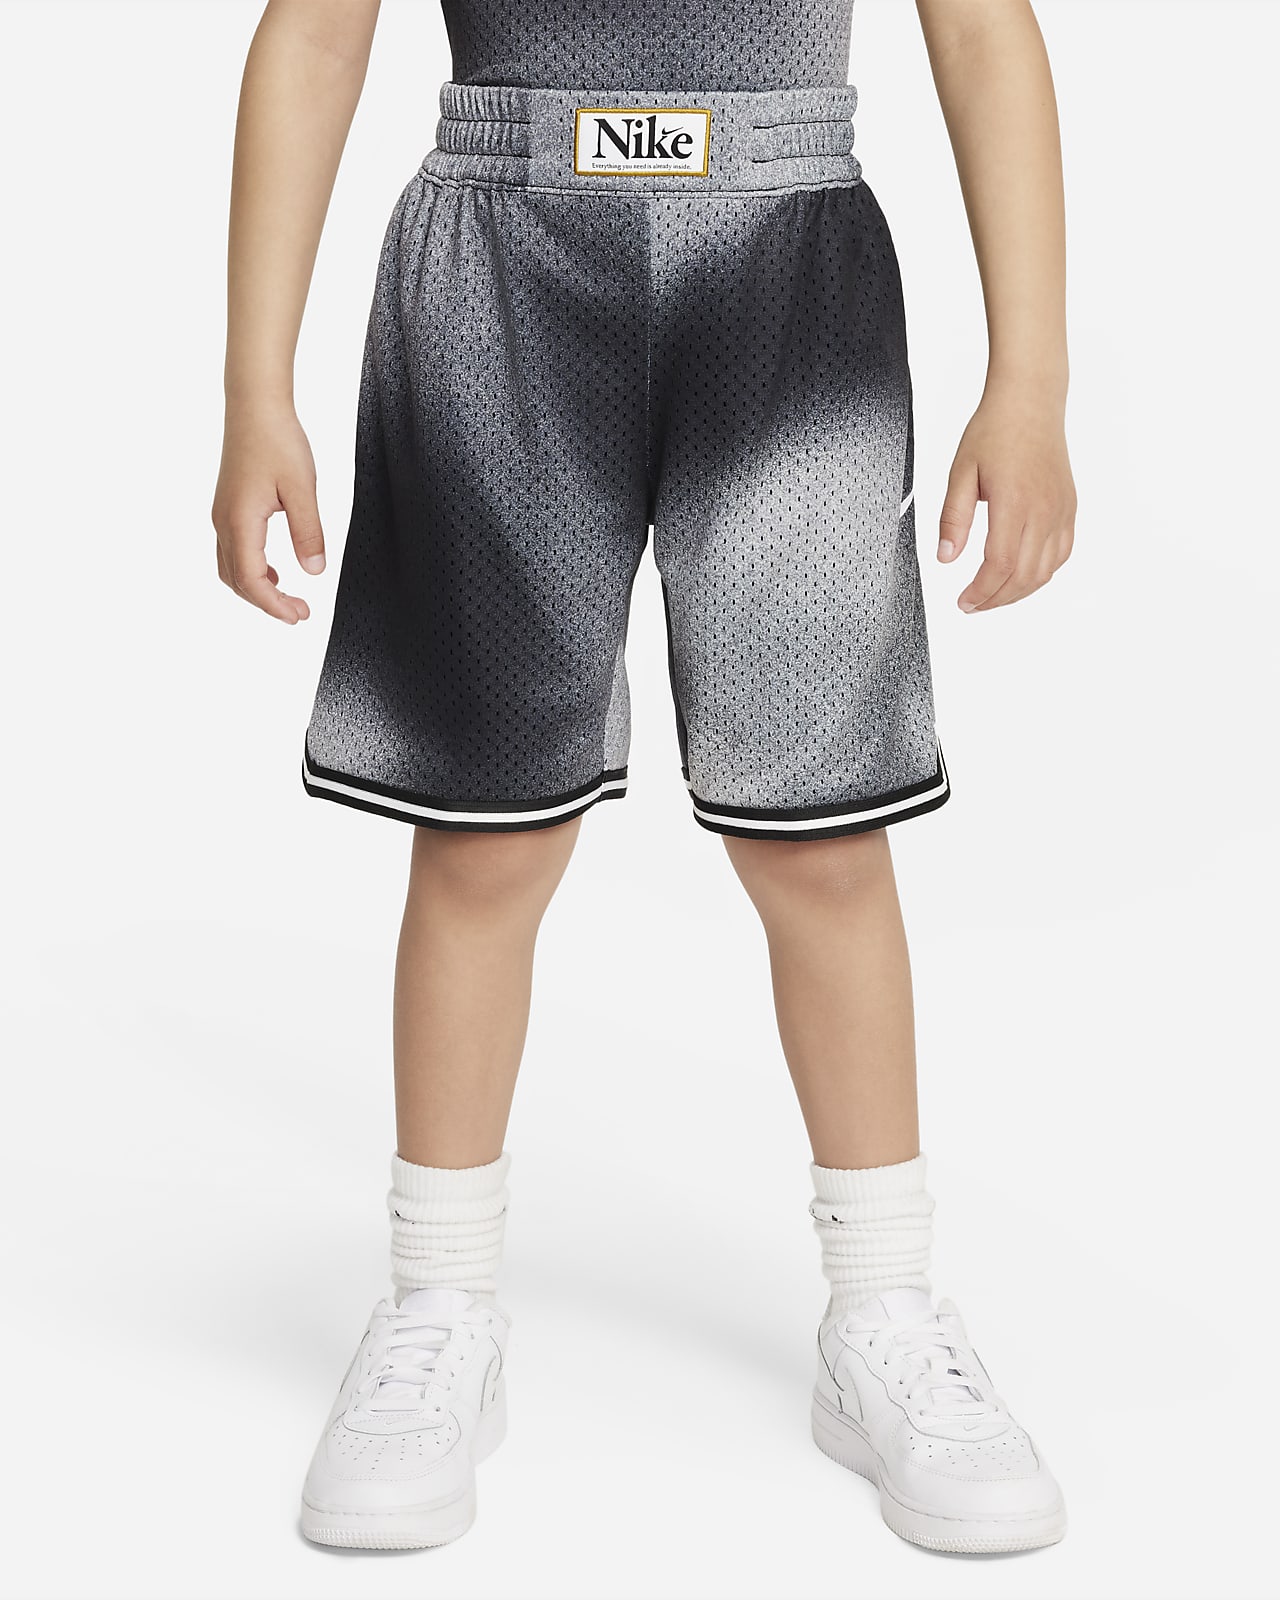 Nike Culture of Basketball Printed Shorts Little Kids Shorts